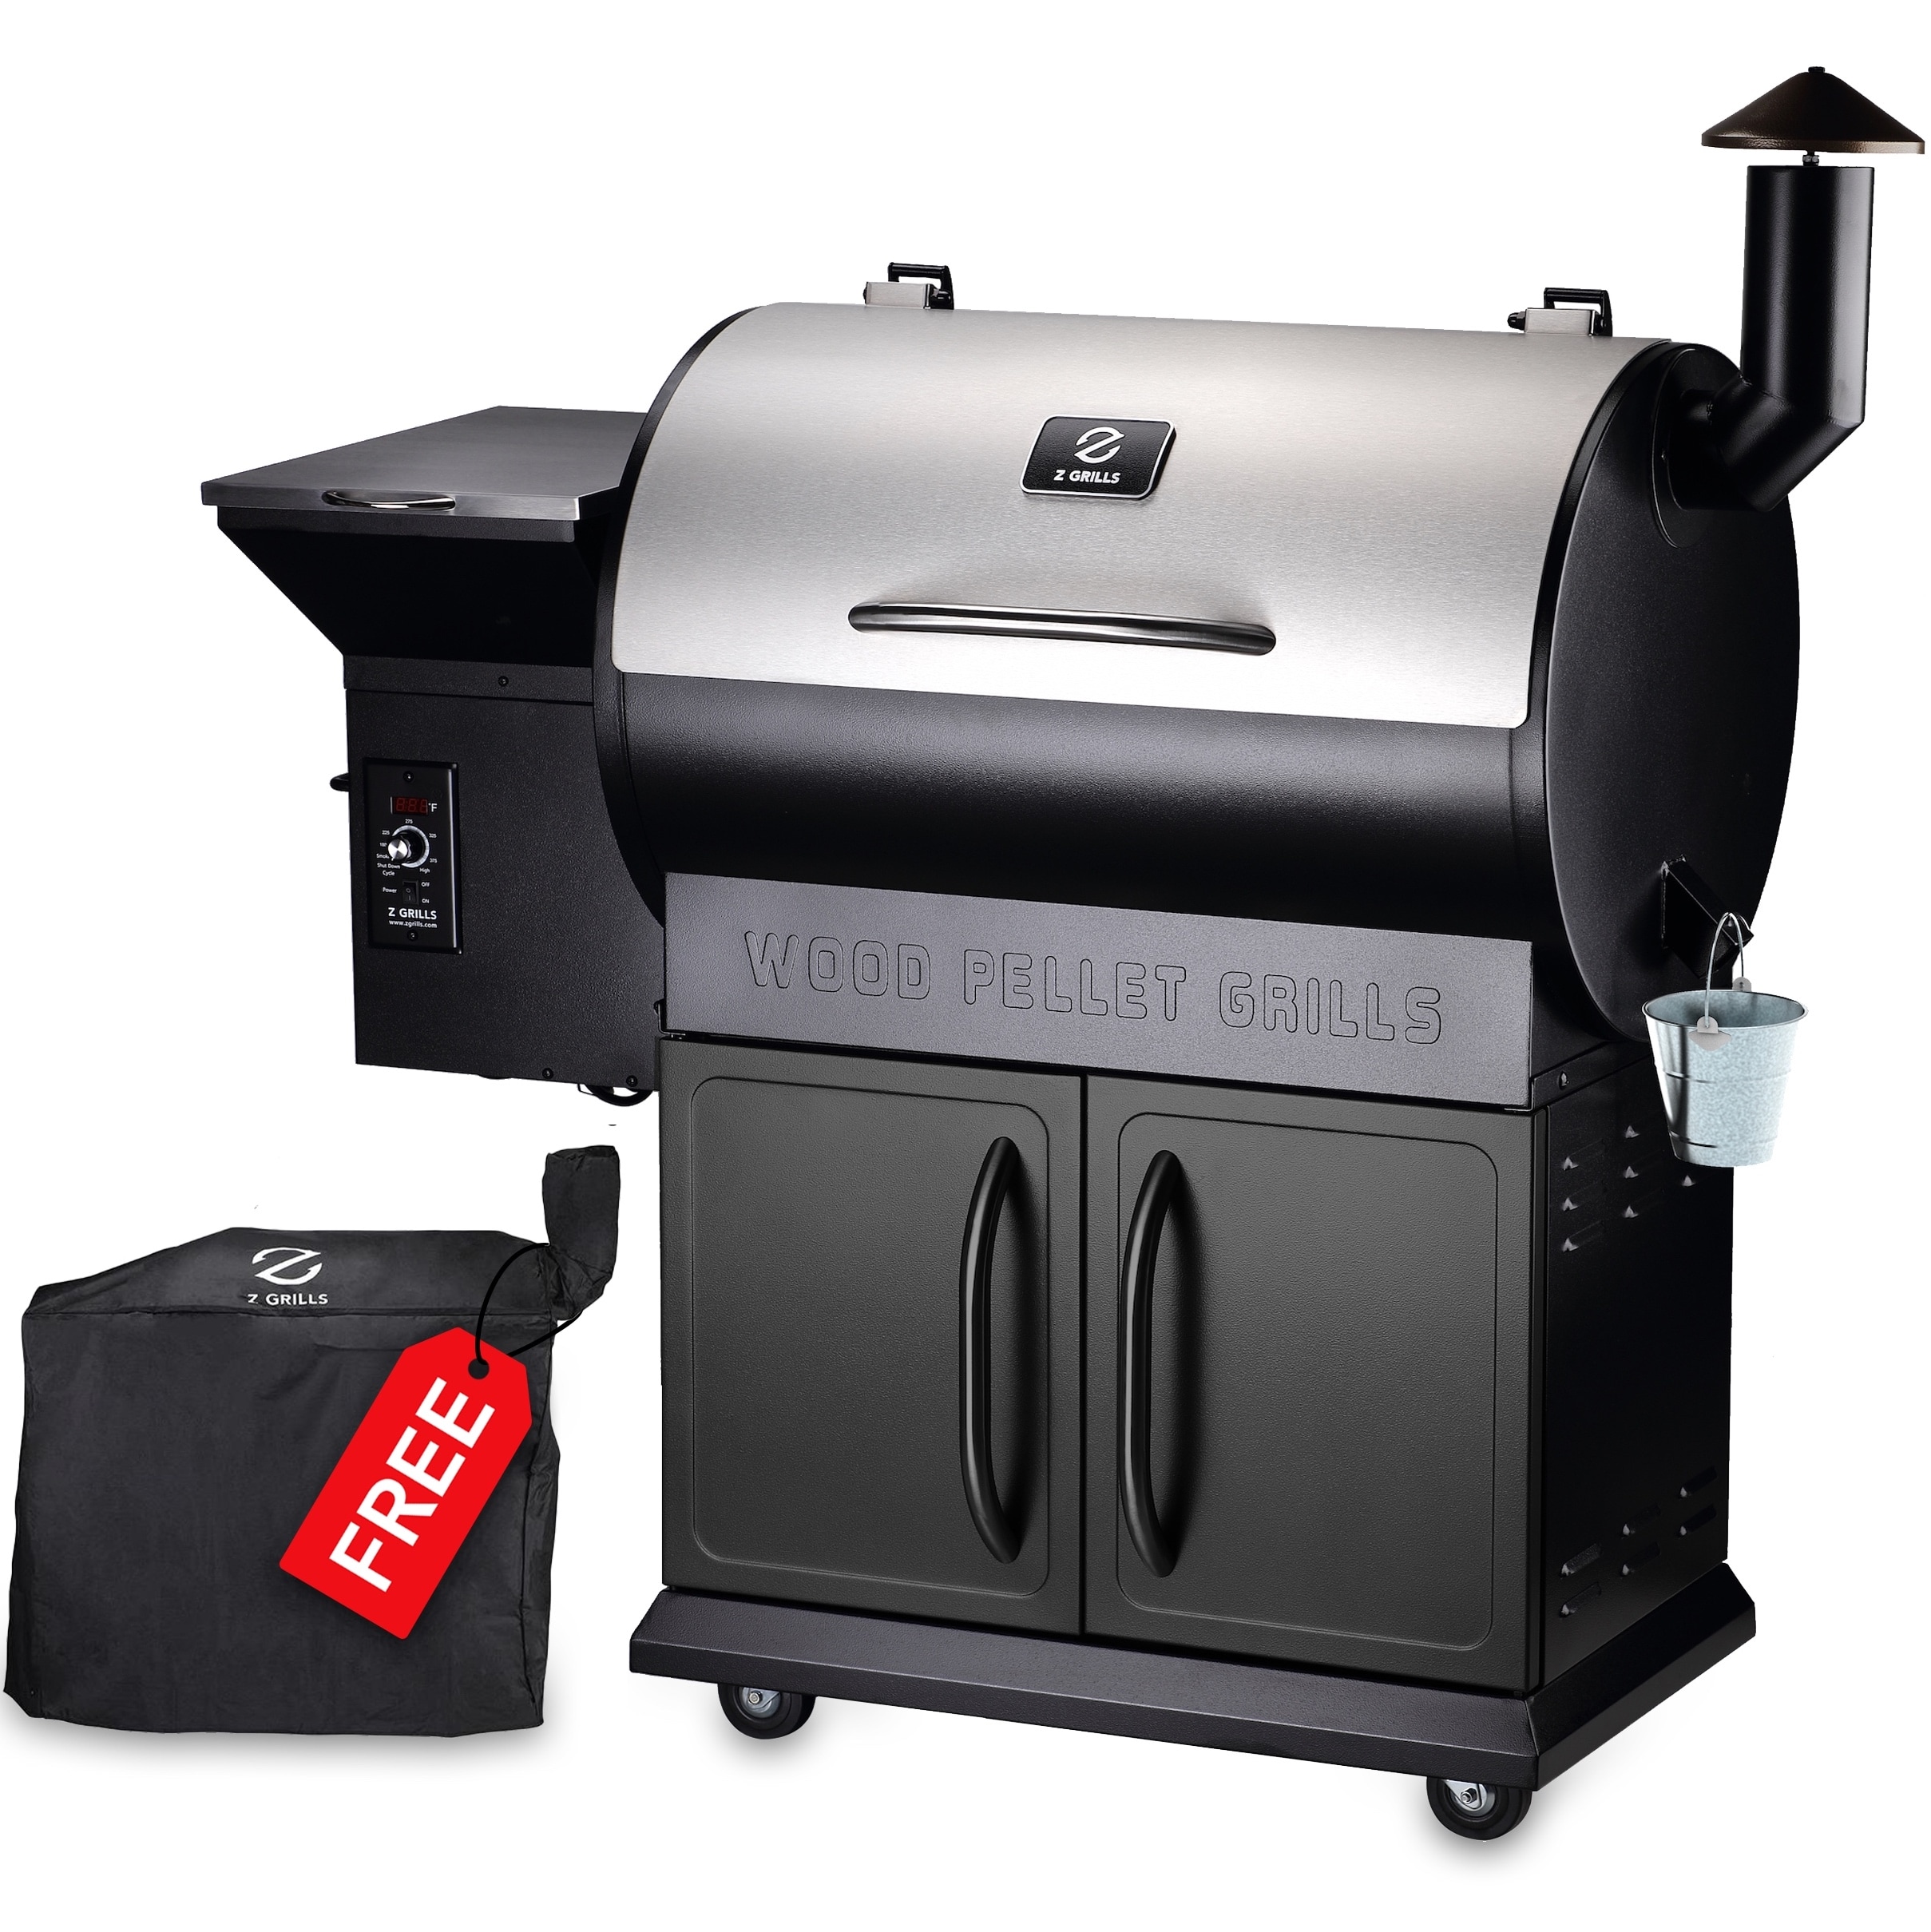 Z GRILLS Wood Pellet Smoker Grill, 8 in 1 BBQ Grill with Auto Temperature  Control, 697 sq in Cooking Area for Backyard, Patio and Outdoor Cooking